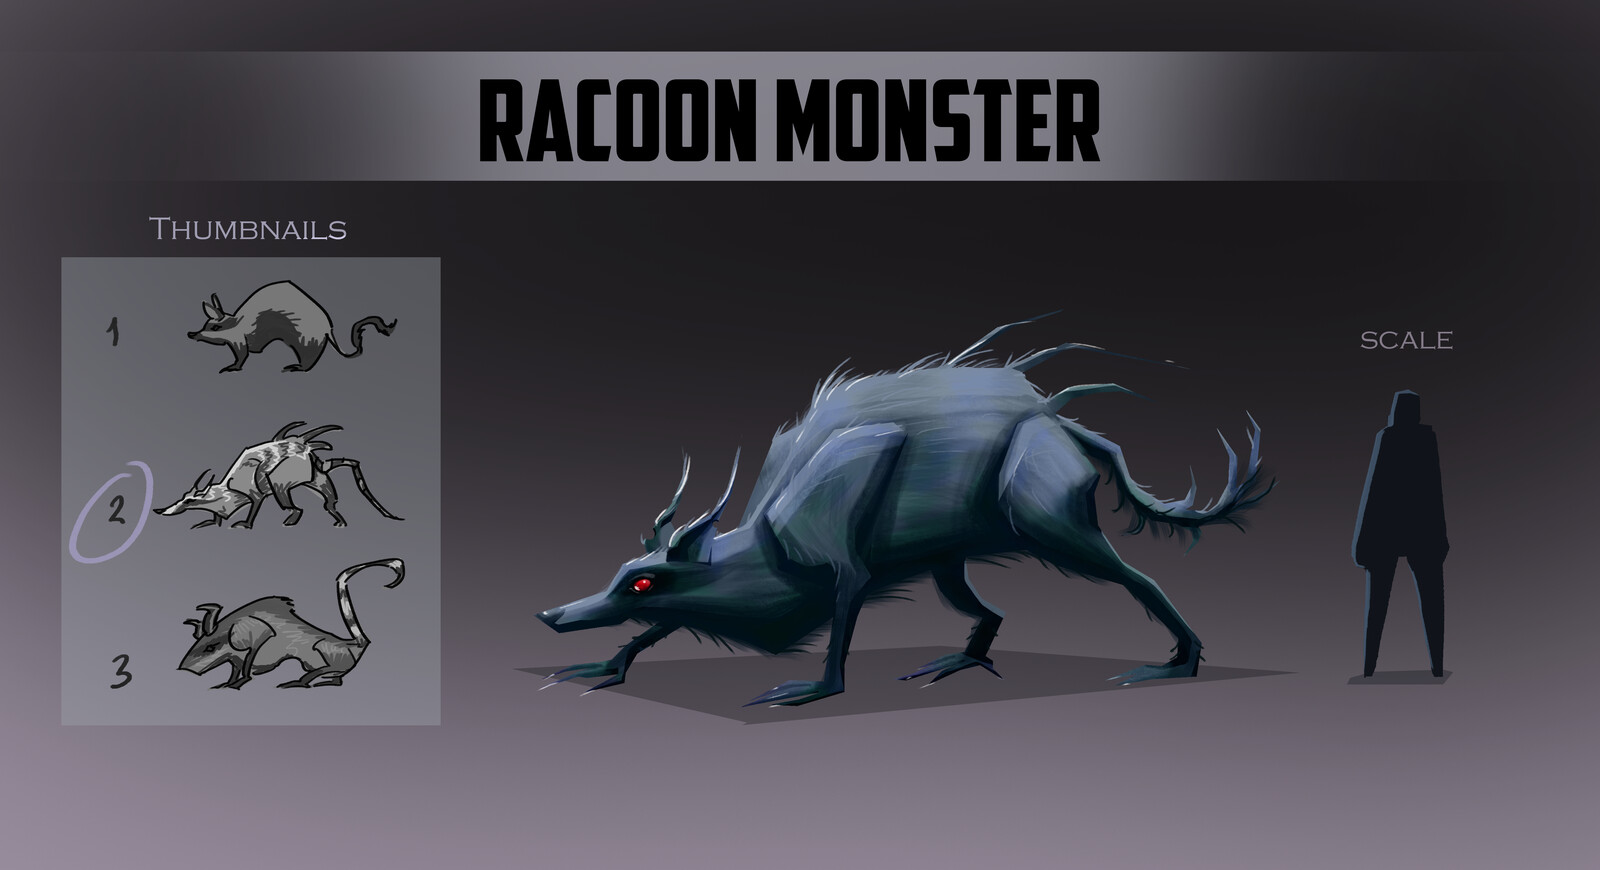 Man-eating racoon monster for fictional game "Snack Run"